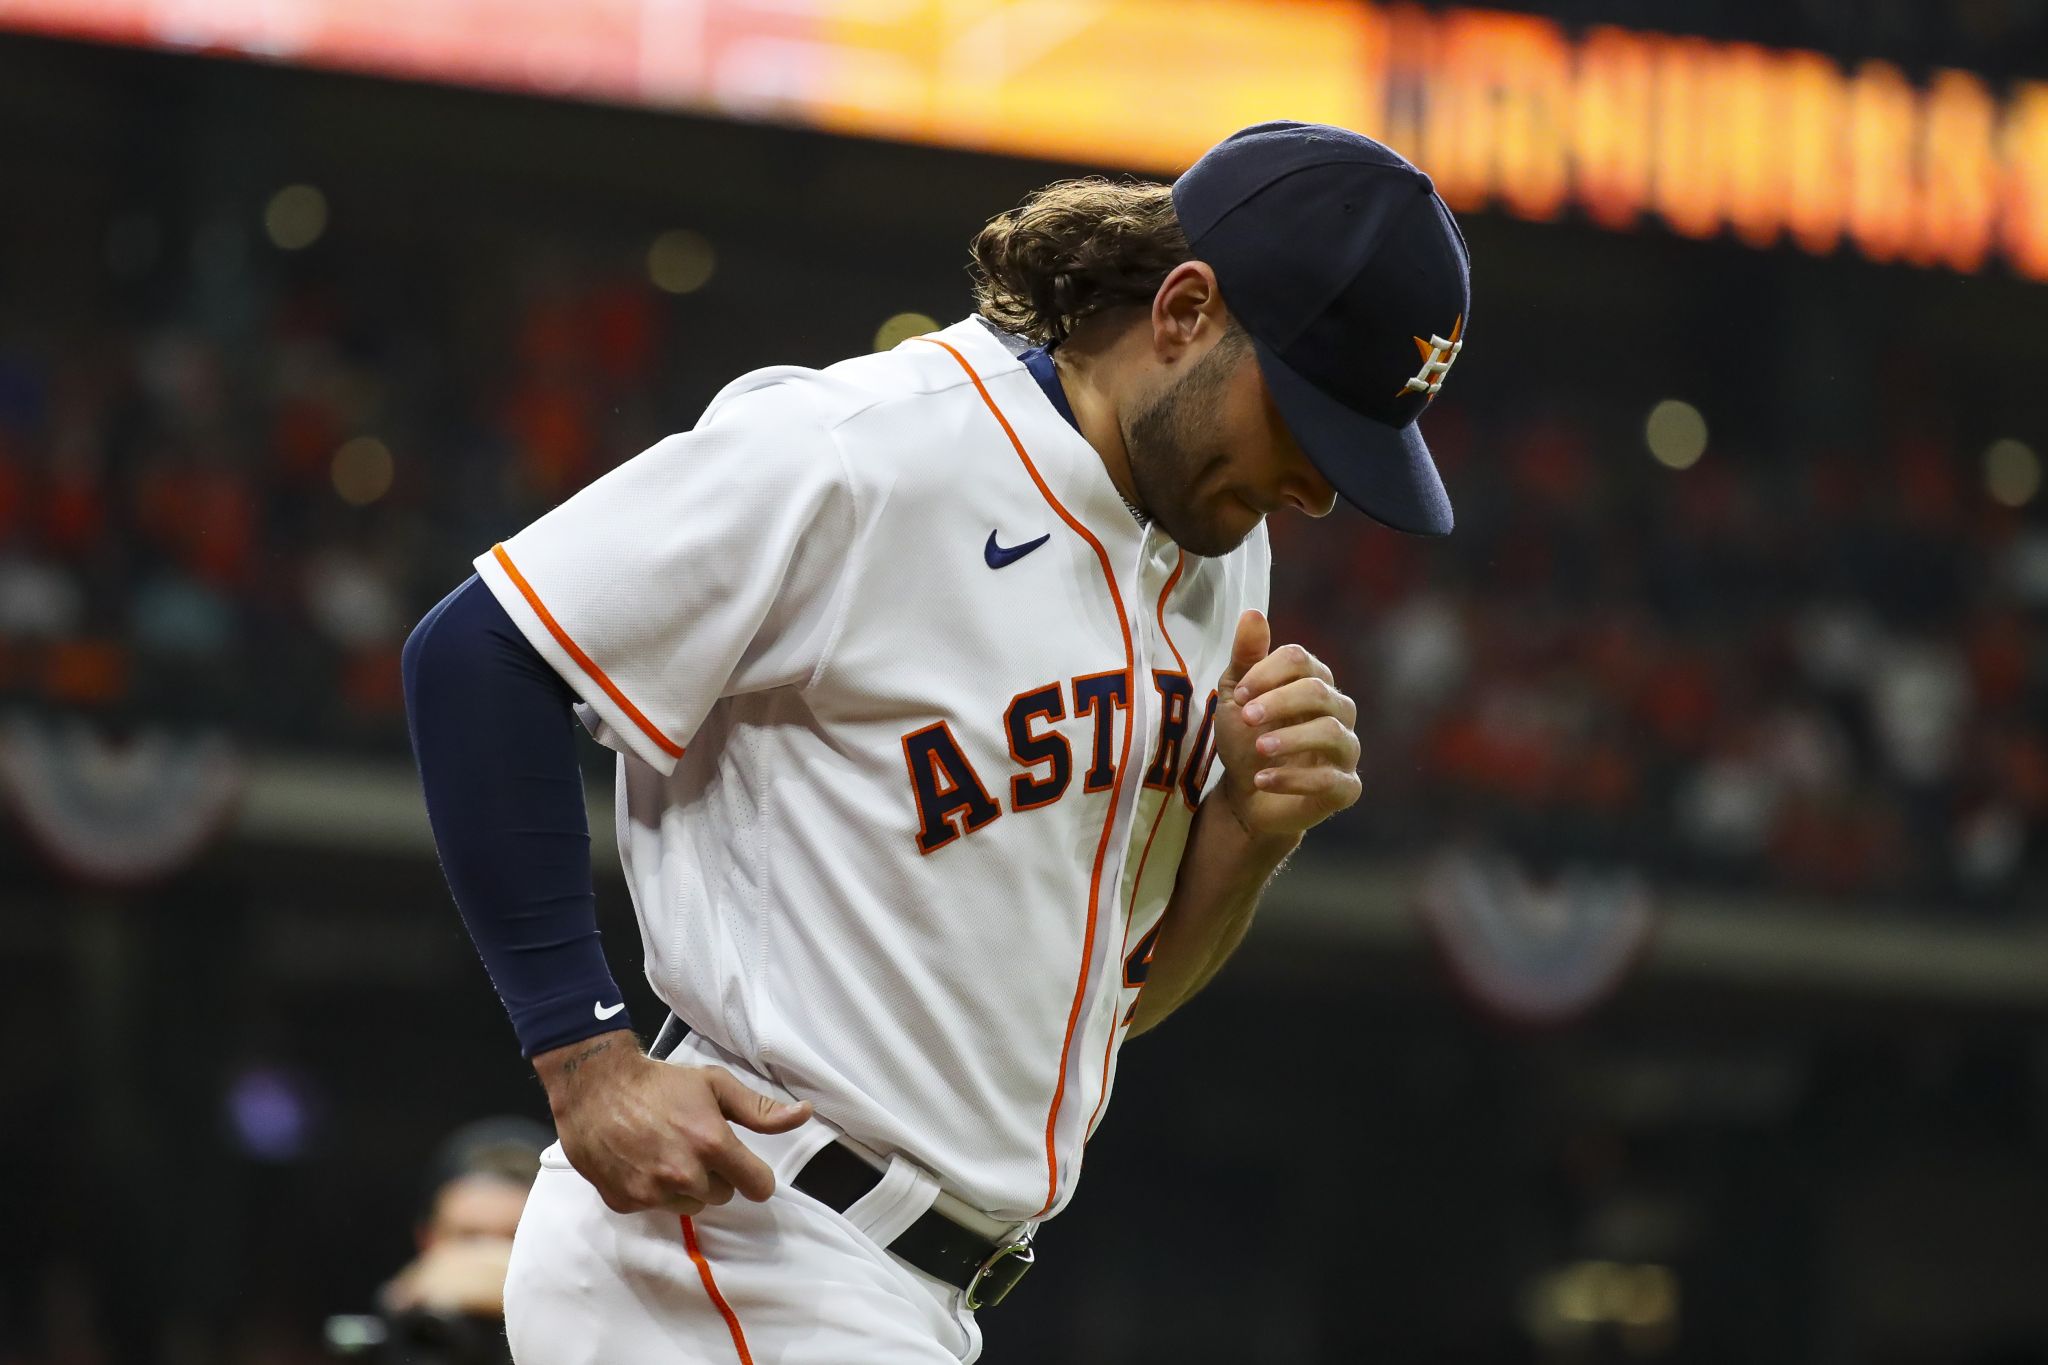 Astros pitcher, Tampa native Lance McCullers Jr. inks left arm into an ode  to Houston